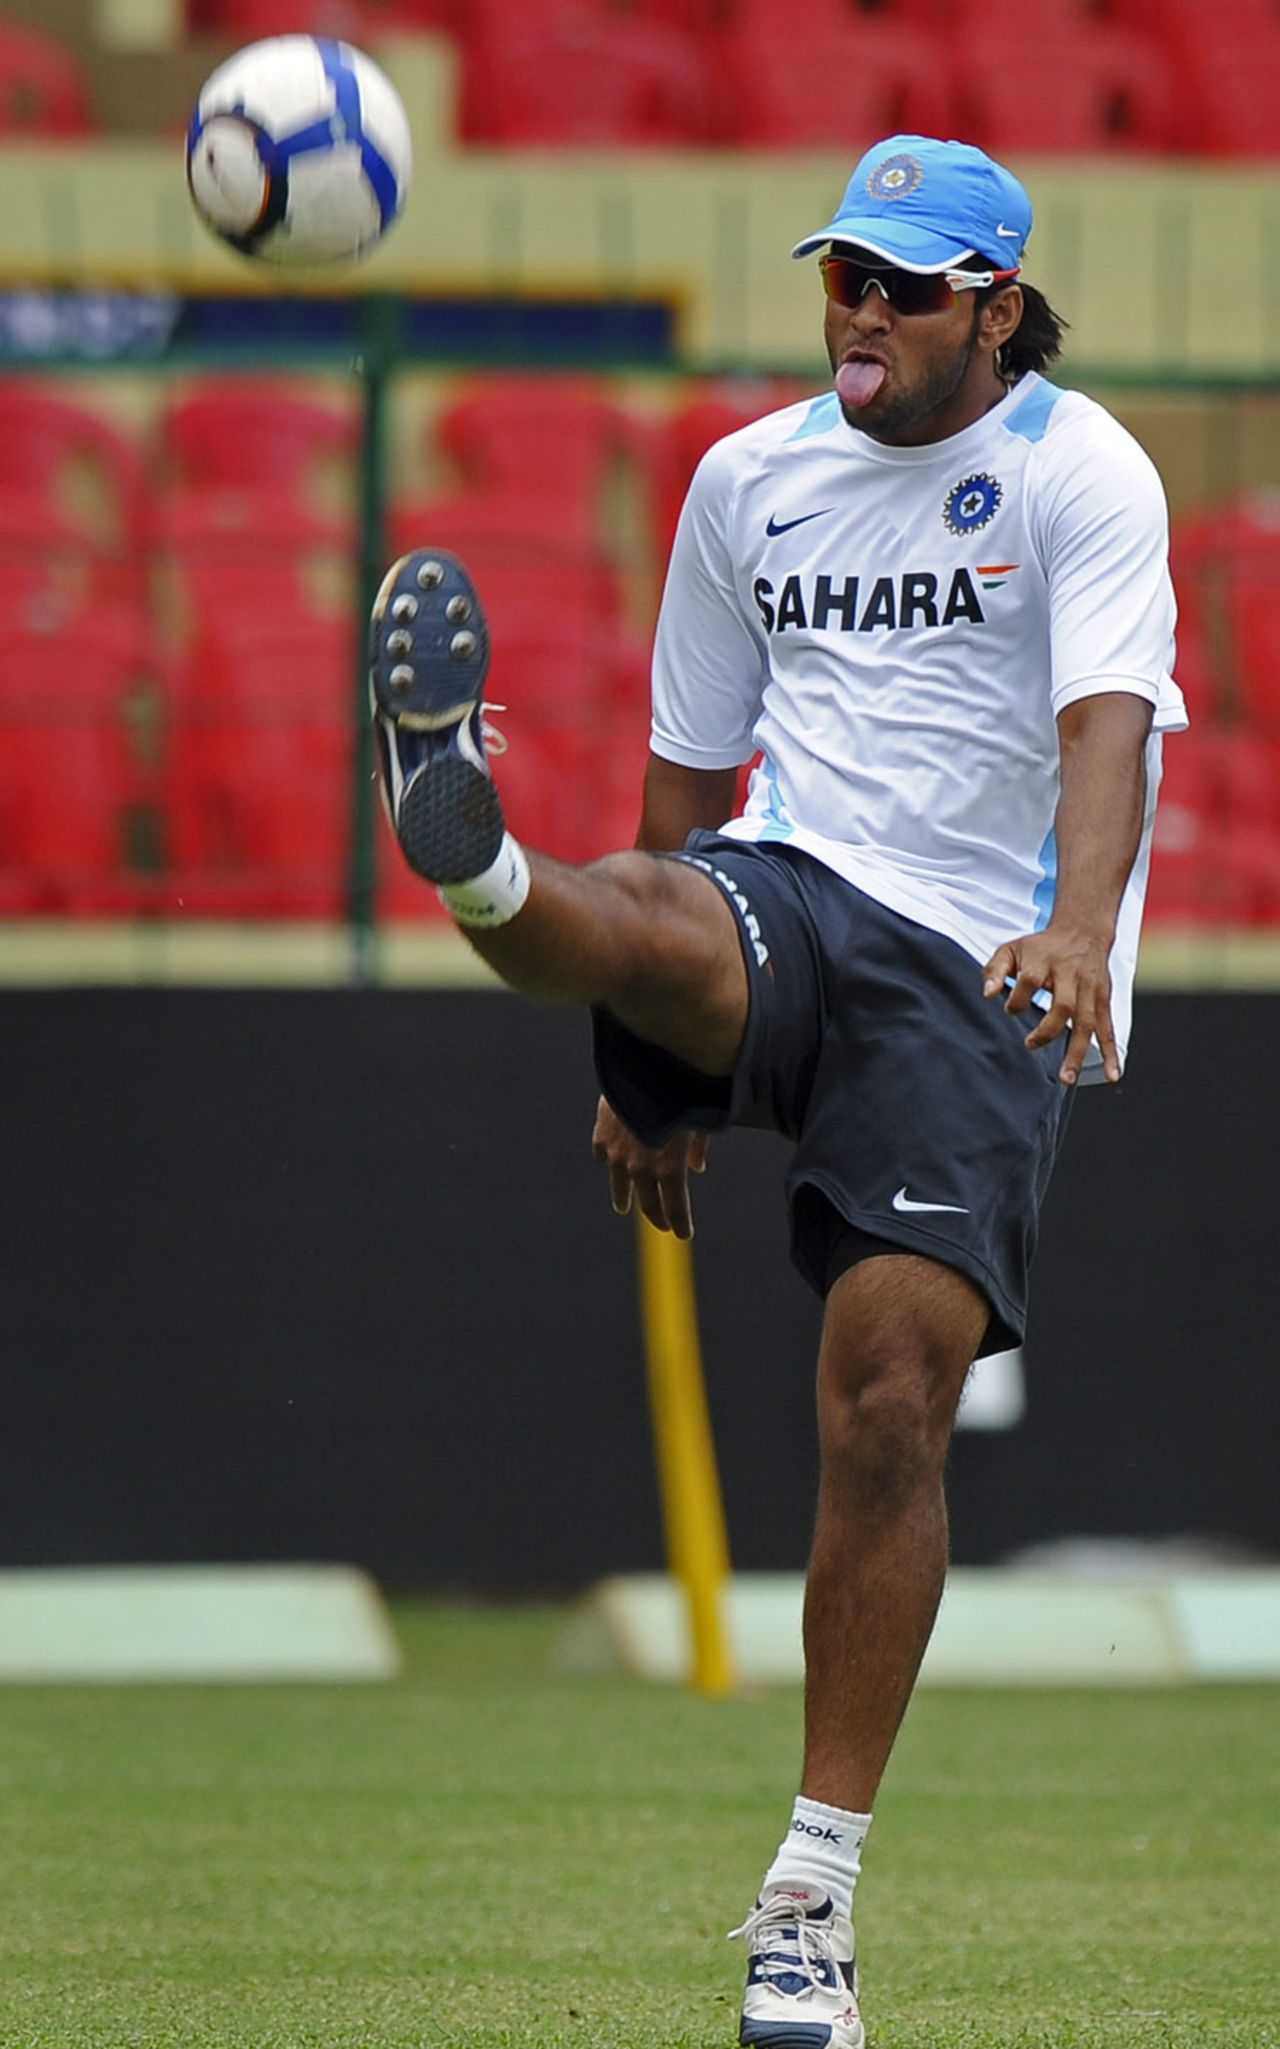 Saurabh Tiwary works on his football skills ahead of India's fourth ODI against New Zealand, Bangalore, December 6, 2010